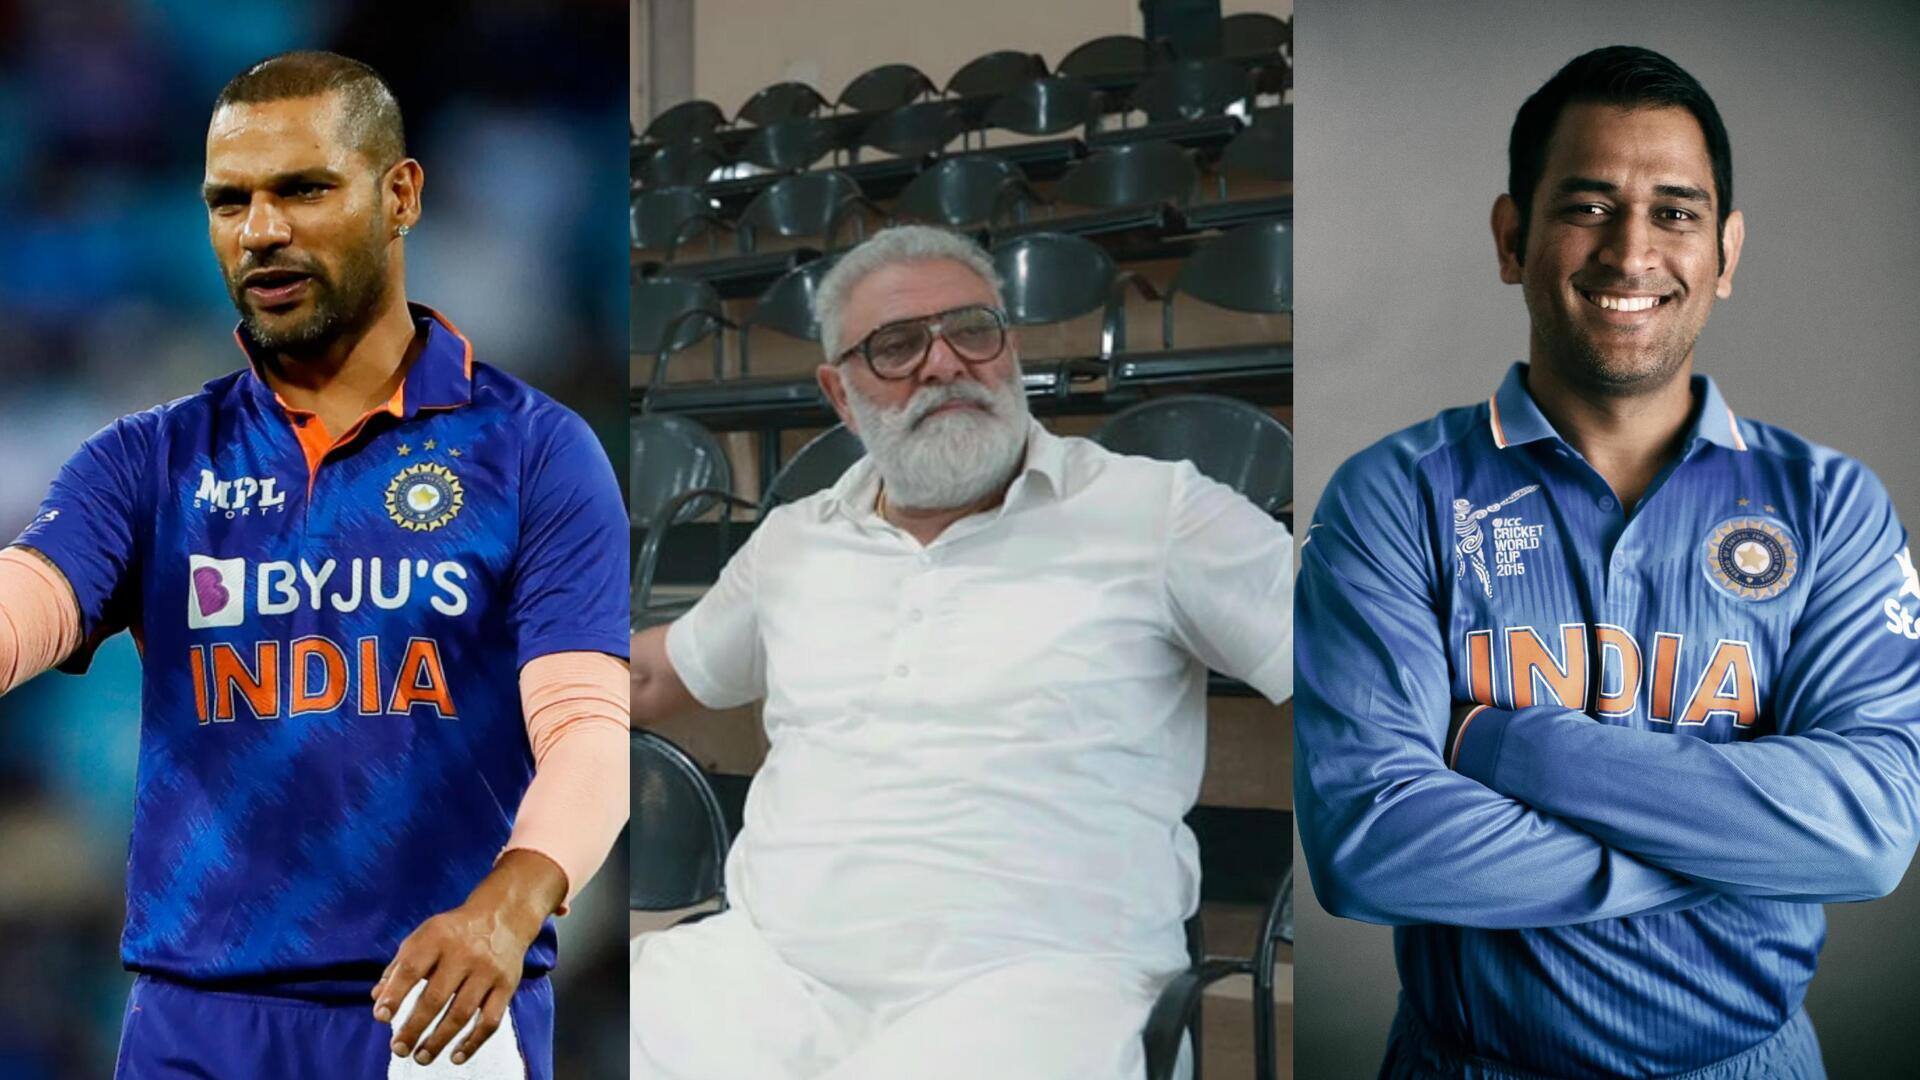 Will Dhoni try acting? Indian cricketers and their movie stints 